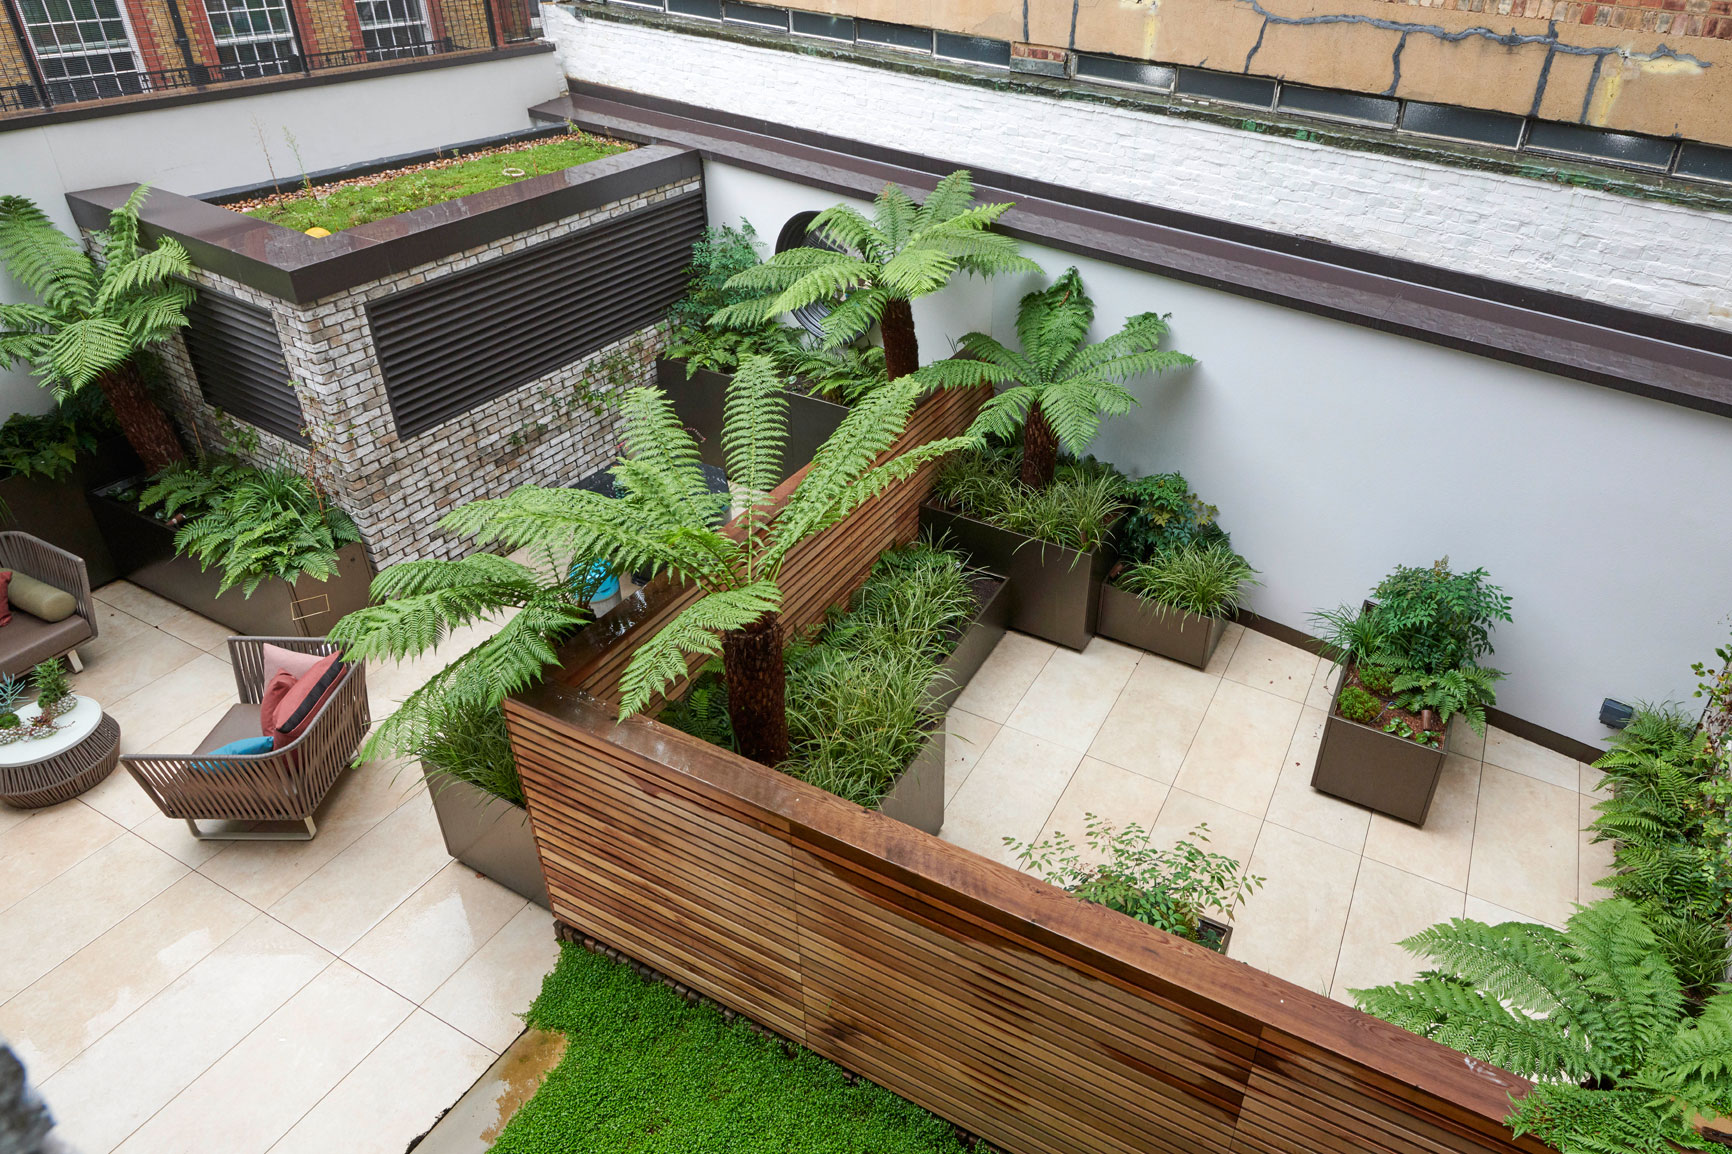 Wellness gardens: A lifeline for the health and wellbeing of urban residents